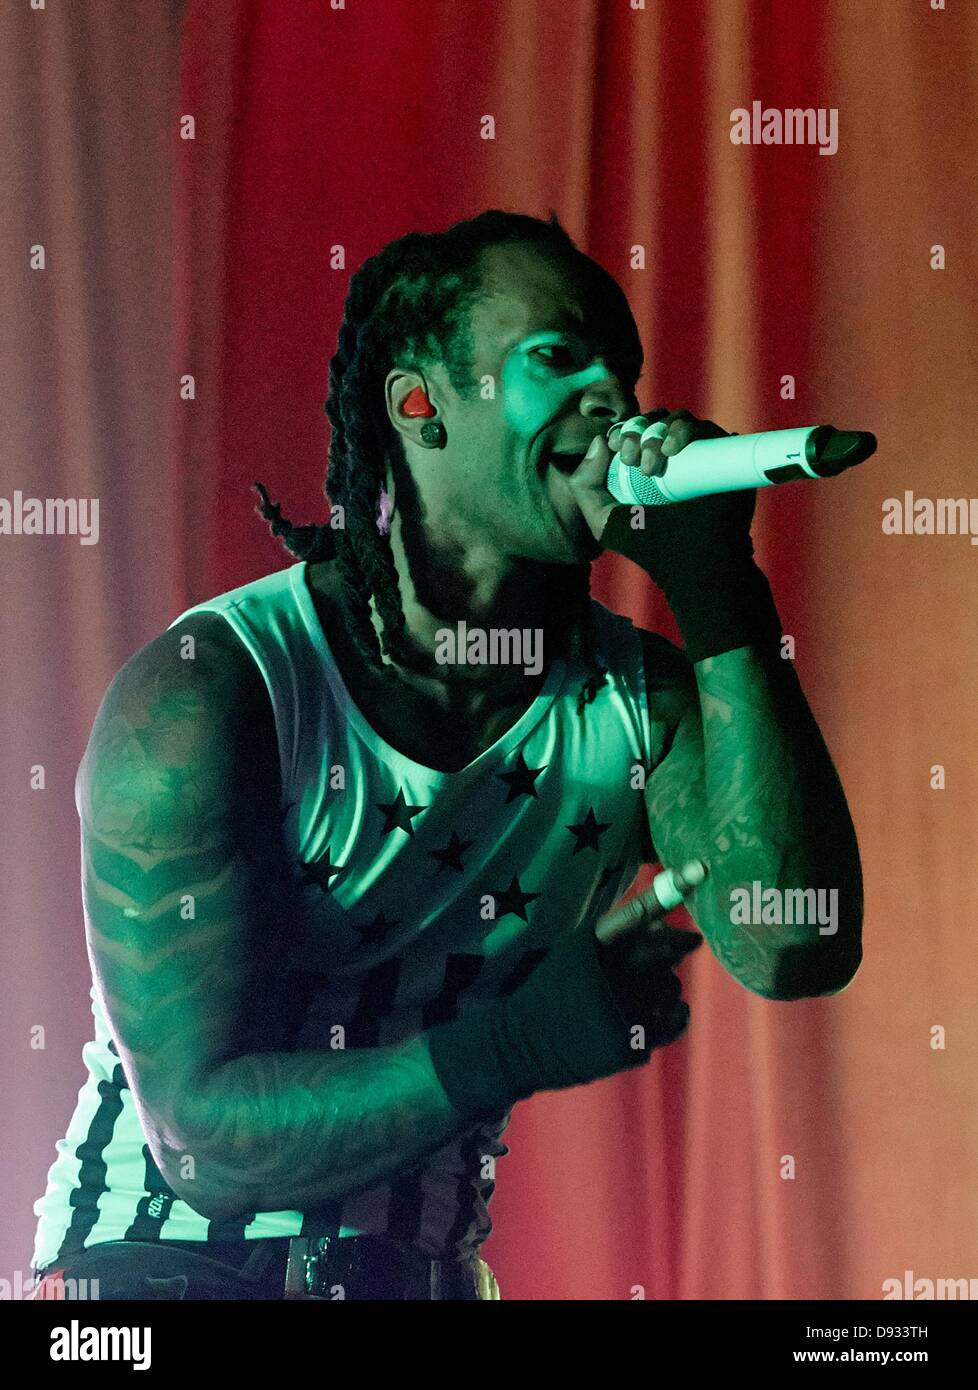 Nuerburg, Germany, 8 June 2013. Singer of the British band 'The Prodigy', Maxim Reality, performs on stage during the Rock am Ring music festival in Nuerburg, Germany, 8 June 2013. Credit:  dpa picture alliance/Alamy Live News Stock Photo